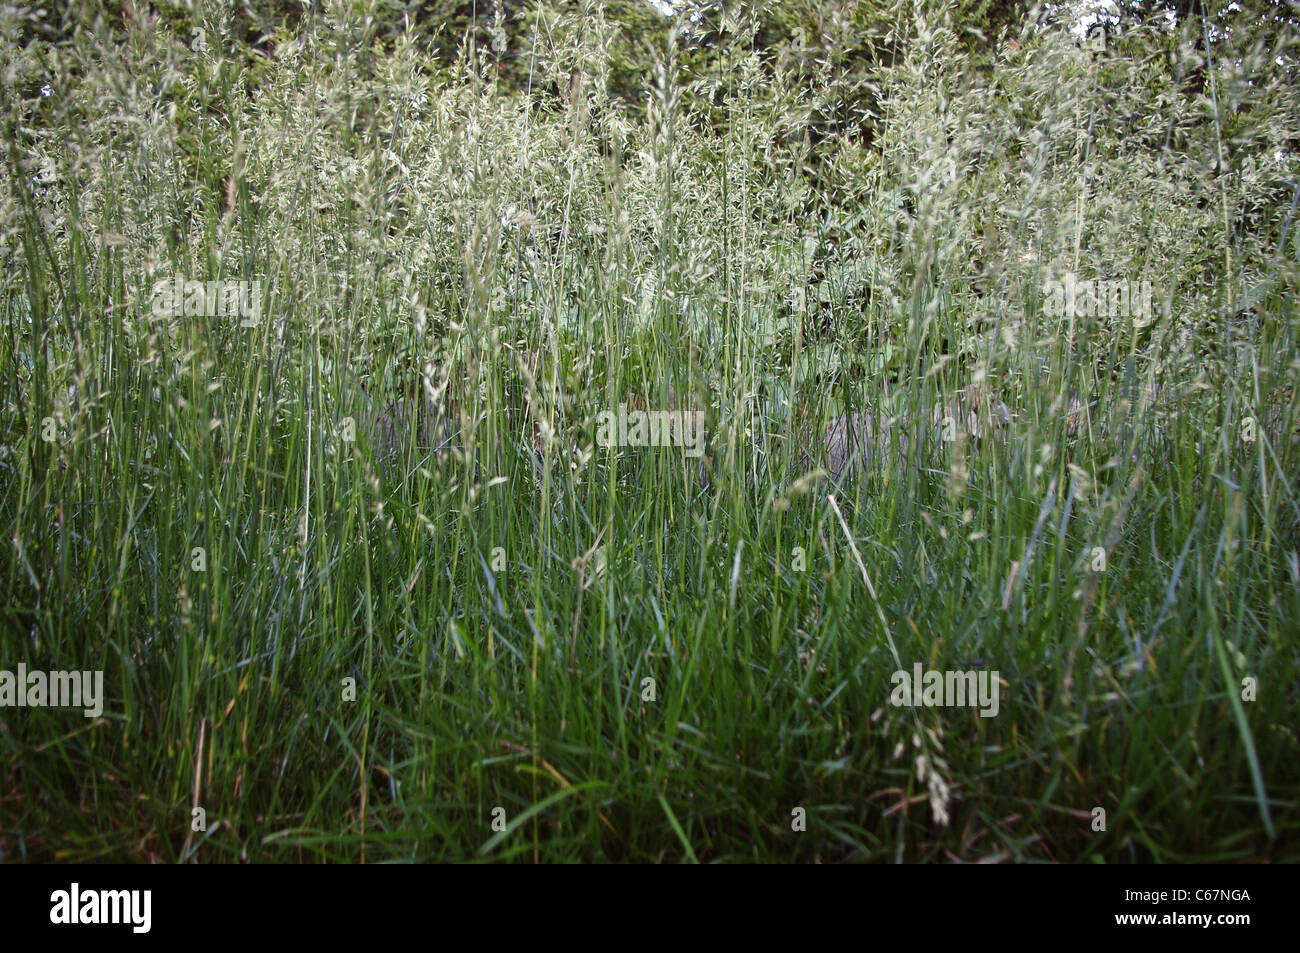 Tall Oat Grass (Arrhenatherum elatius (L.) Beauv.) a common perennial tall grass viewed from the side. Stock Photo